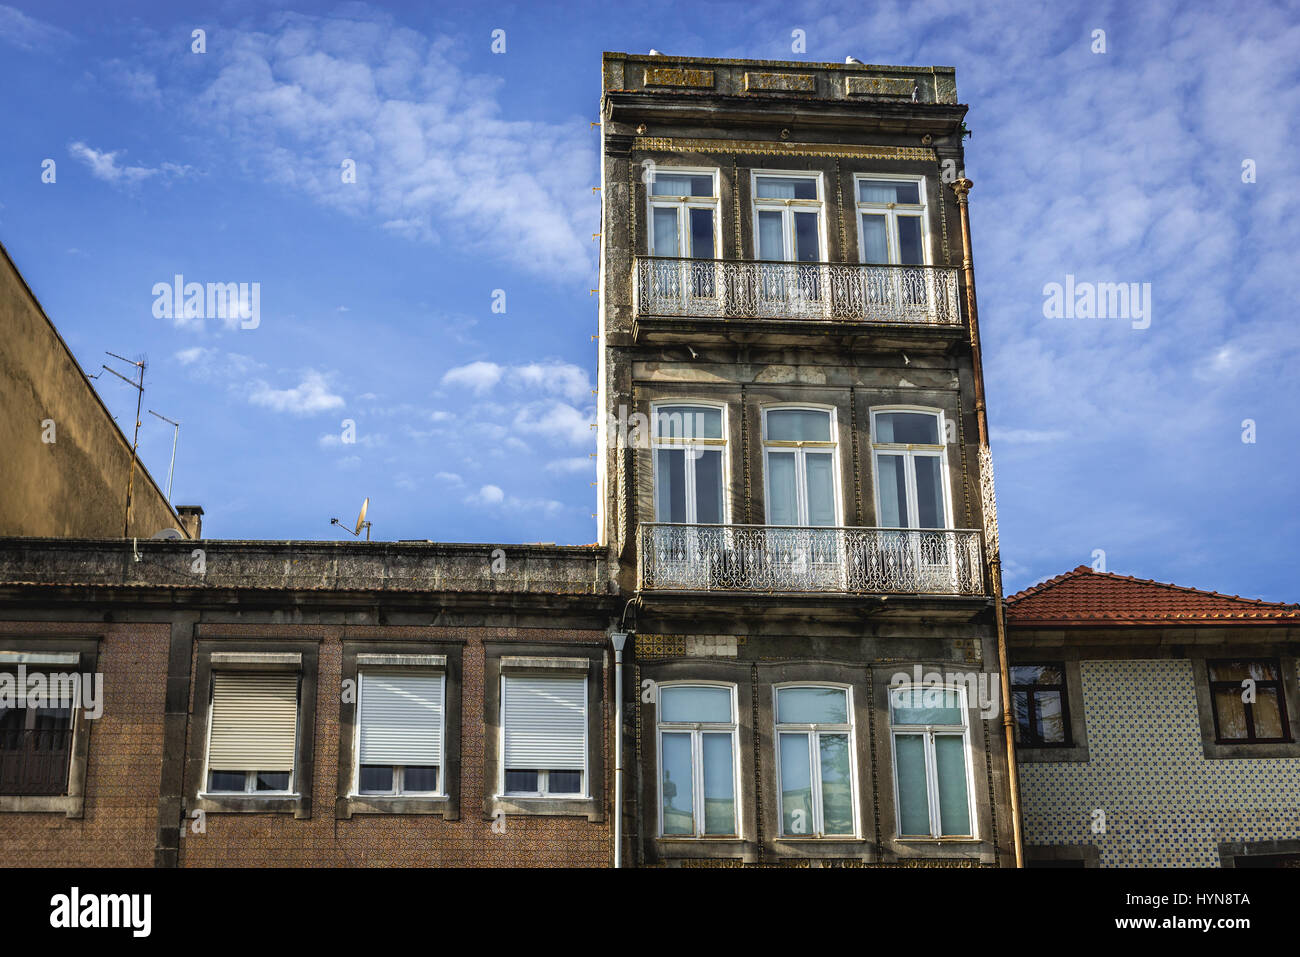 Town houses on Rua de Dom Manuel II street in Porto city on Iberian Peninsula, second largest city in Portugal Stock Photo